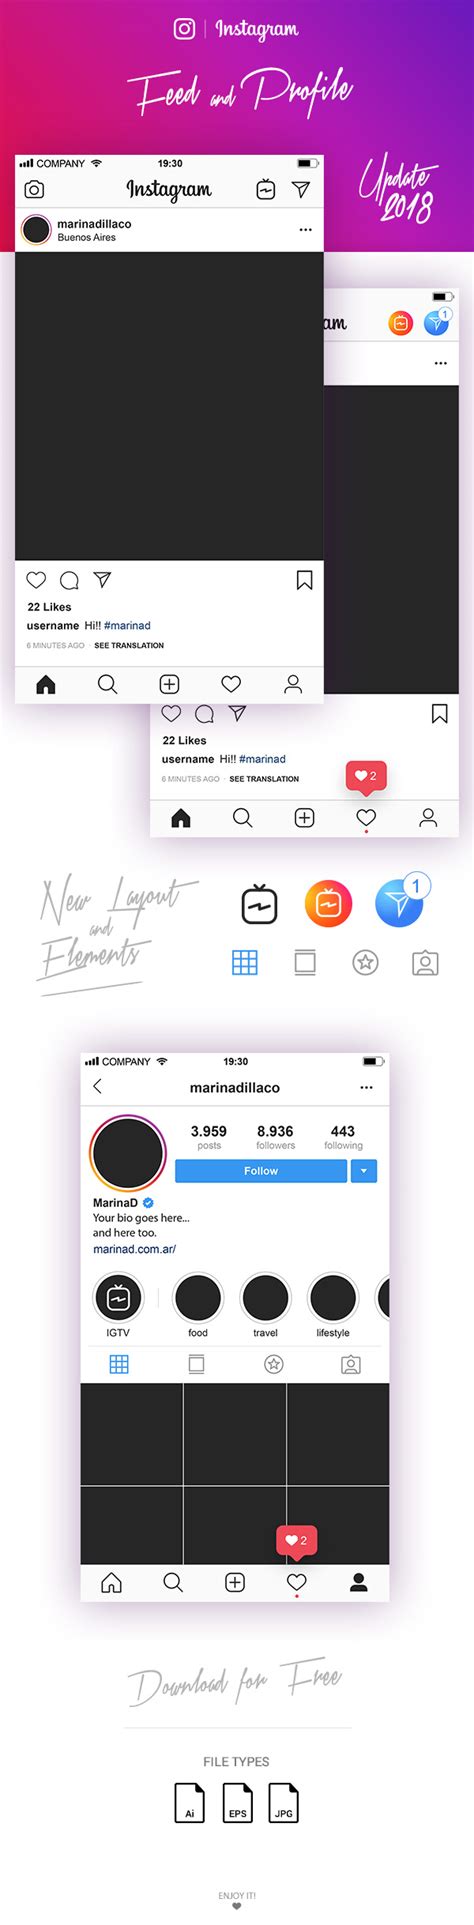 Instagram profile picture download is a free service that allows you to view & download insta dp (i.e. FREE Instagram Layout Feed and Profile UI - 2018 - MarinaD